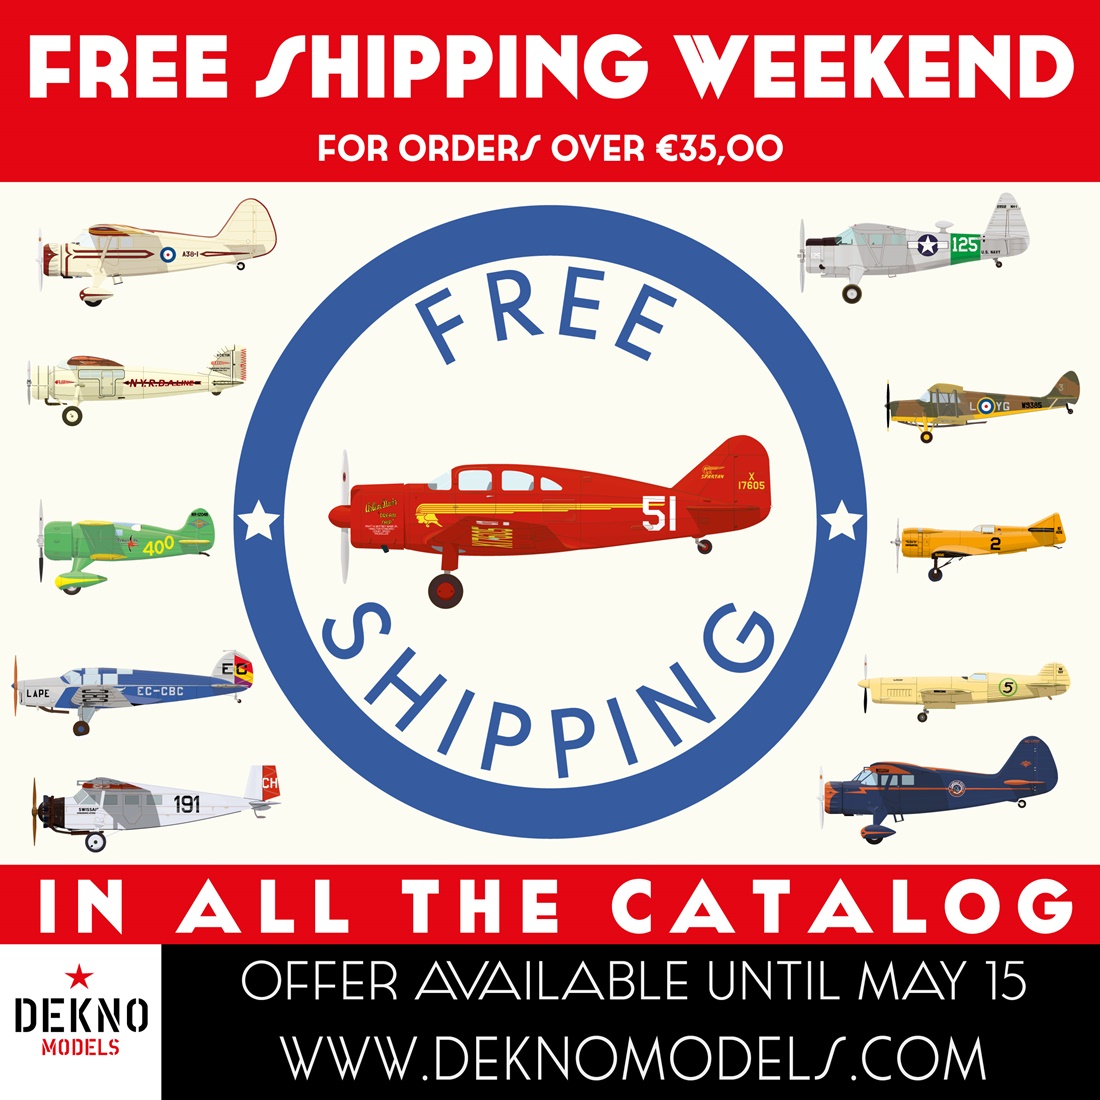 FREE SHIPPING WEEKEND AT DEKNO models! - mailchi.mp/659f9f1a258d/f… -  #scaalemodelaircraft #modelaircraft #resinkit #resinmodel  #maquettes #172modelkits  #148modelkits #maquetteavion #avionsanciens #modellbau #modelisme #modeling #modelife 
#airRacing #deknomodels #arcticdecals